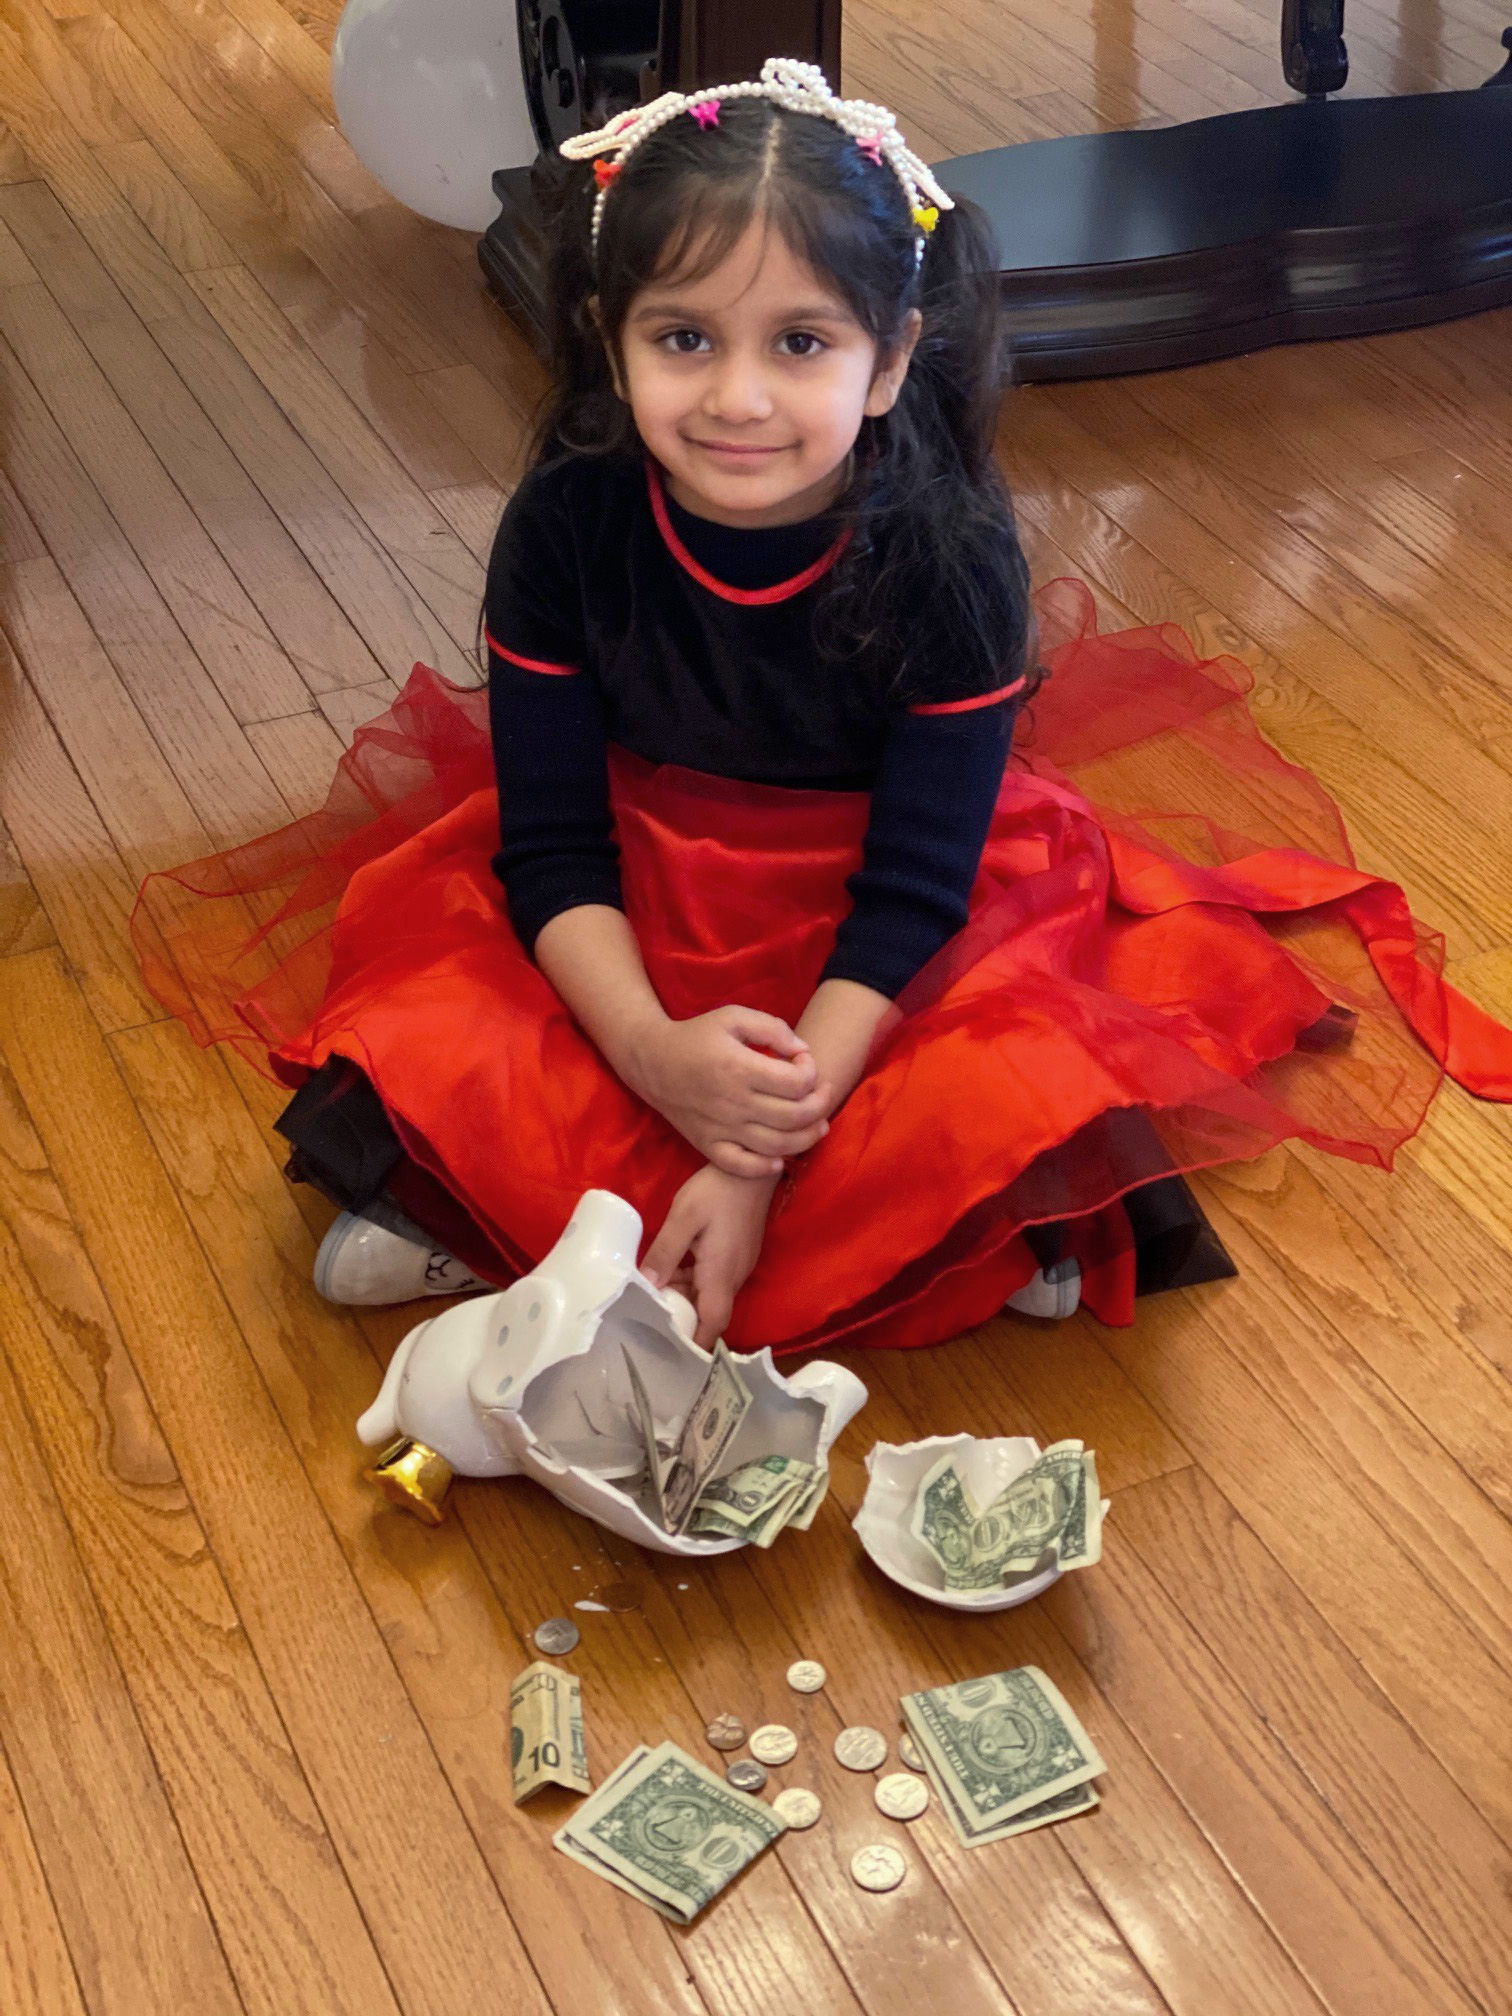 PHOTO: Aryana Chopra, 5, used her own piggy bank money to deliver gifts and New Year's cards to nursing home residents.